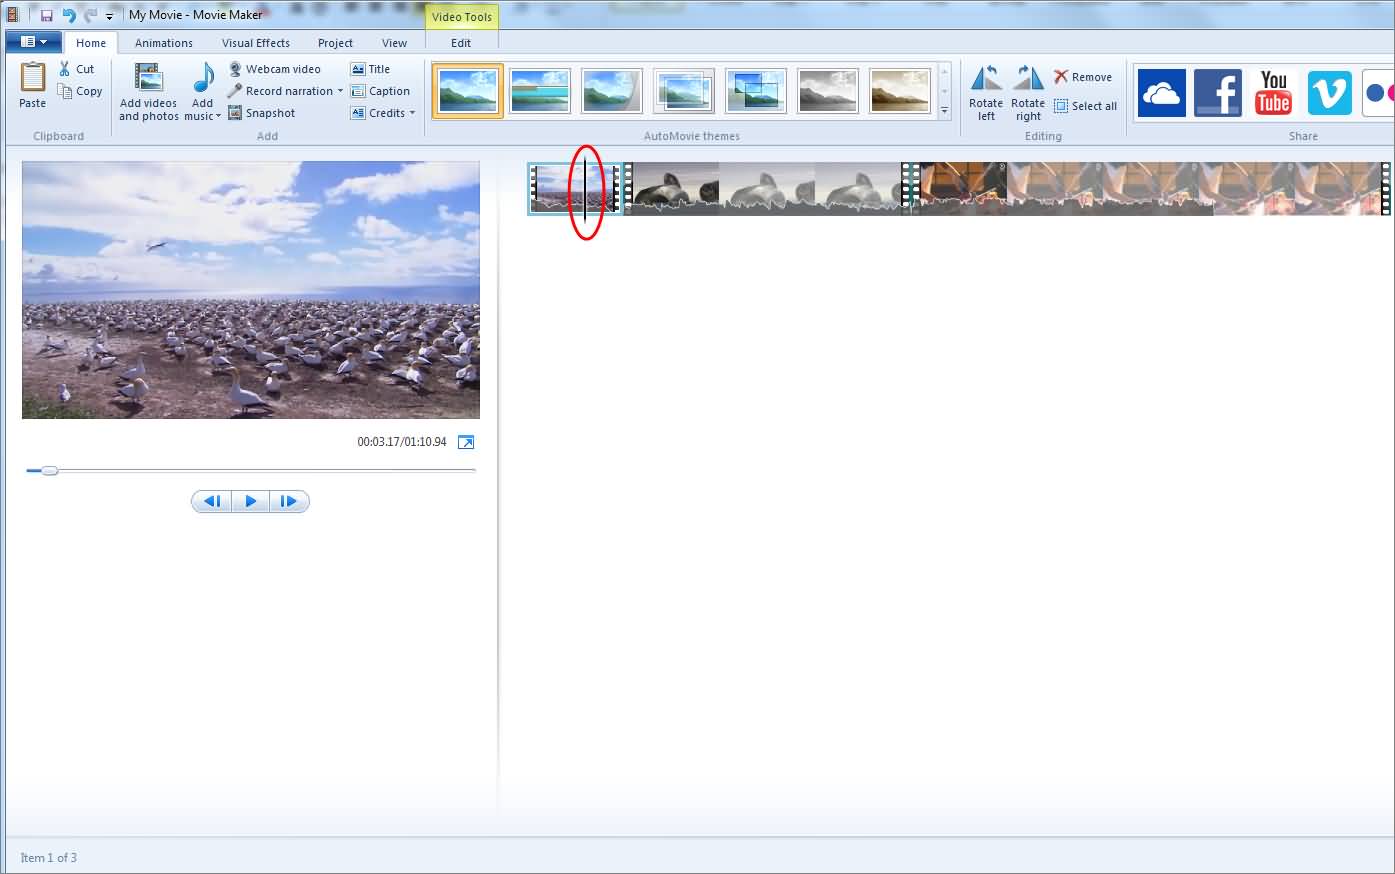 free video editing software for windows